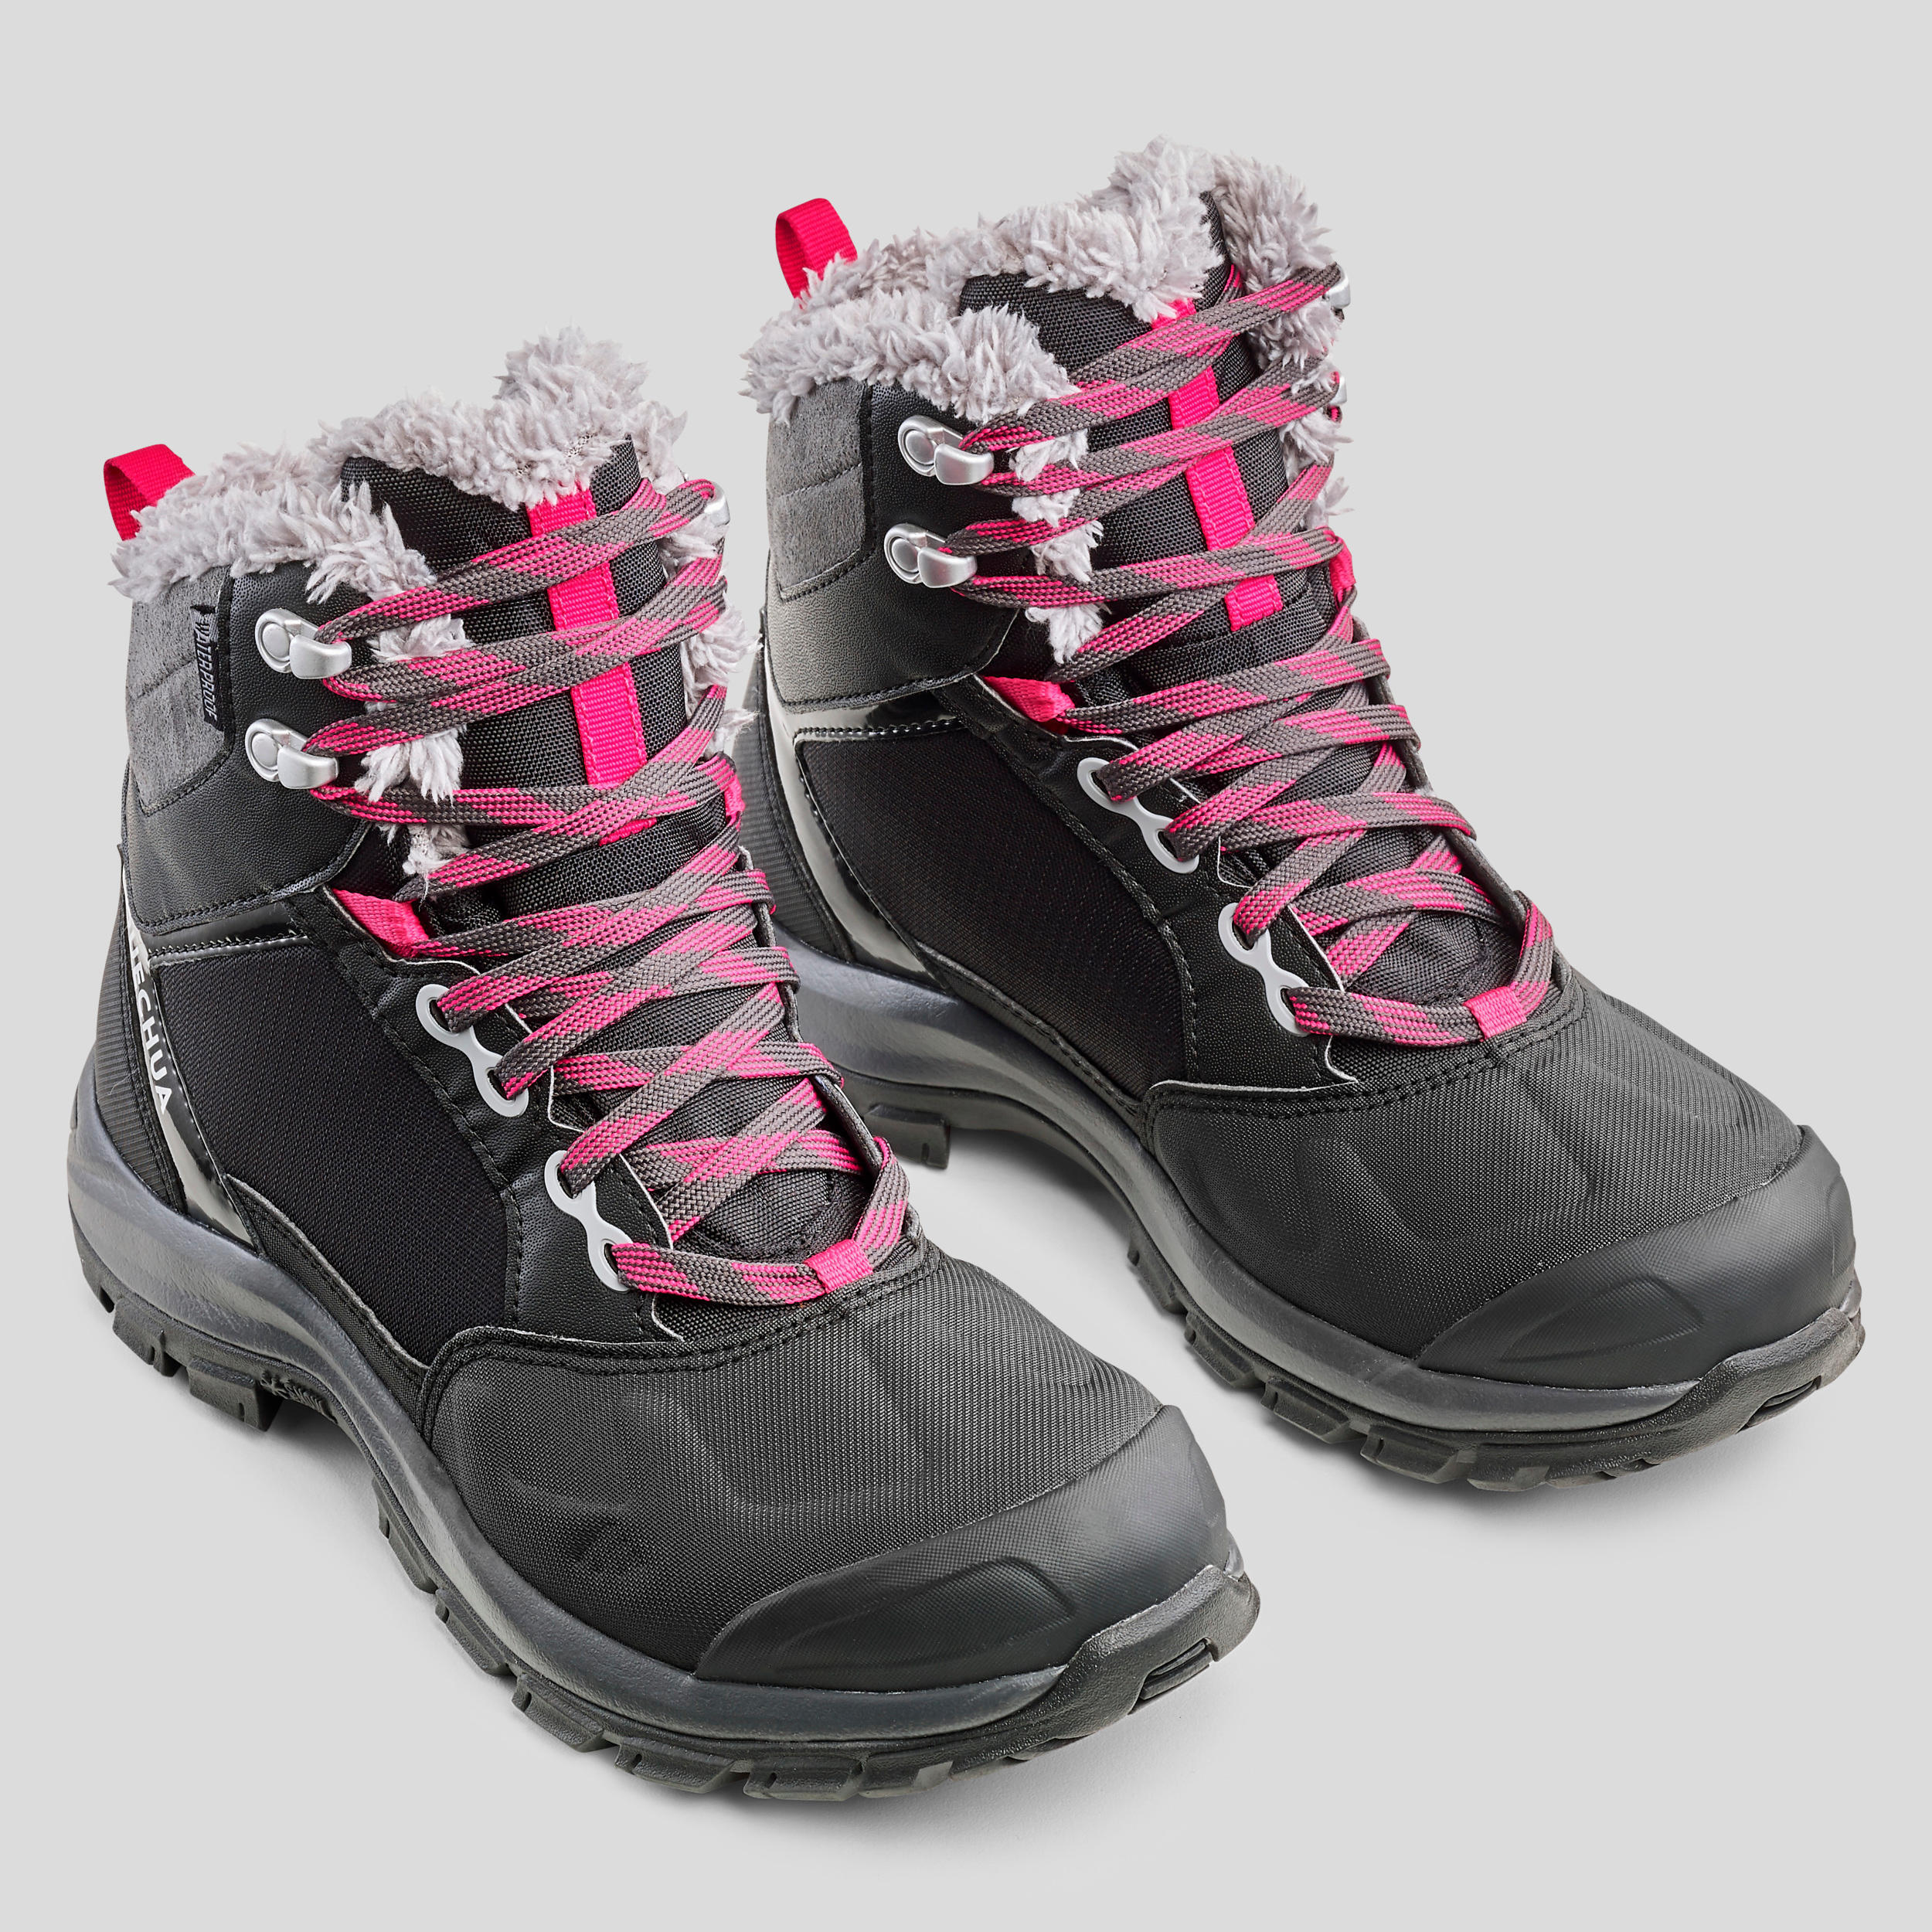 Women's Warm and Waterproof Hiking Boots - SH500 mountain MID 4/9